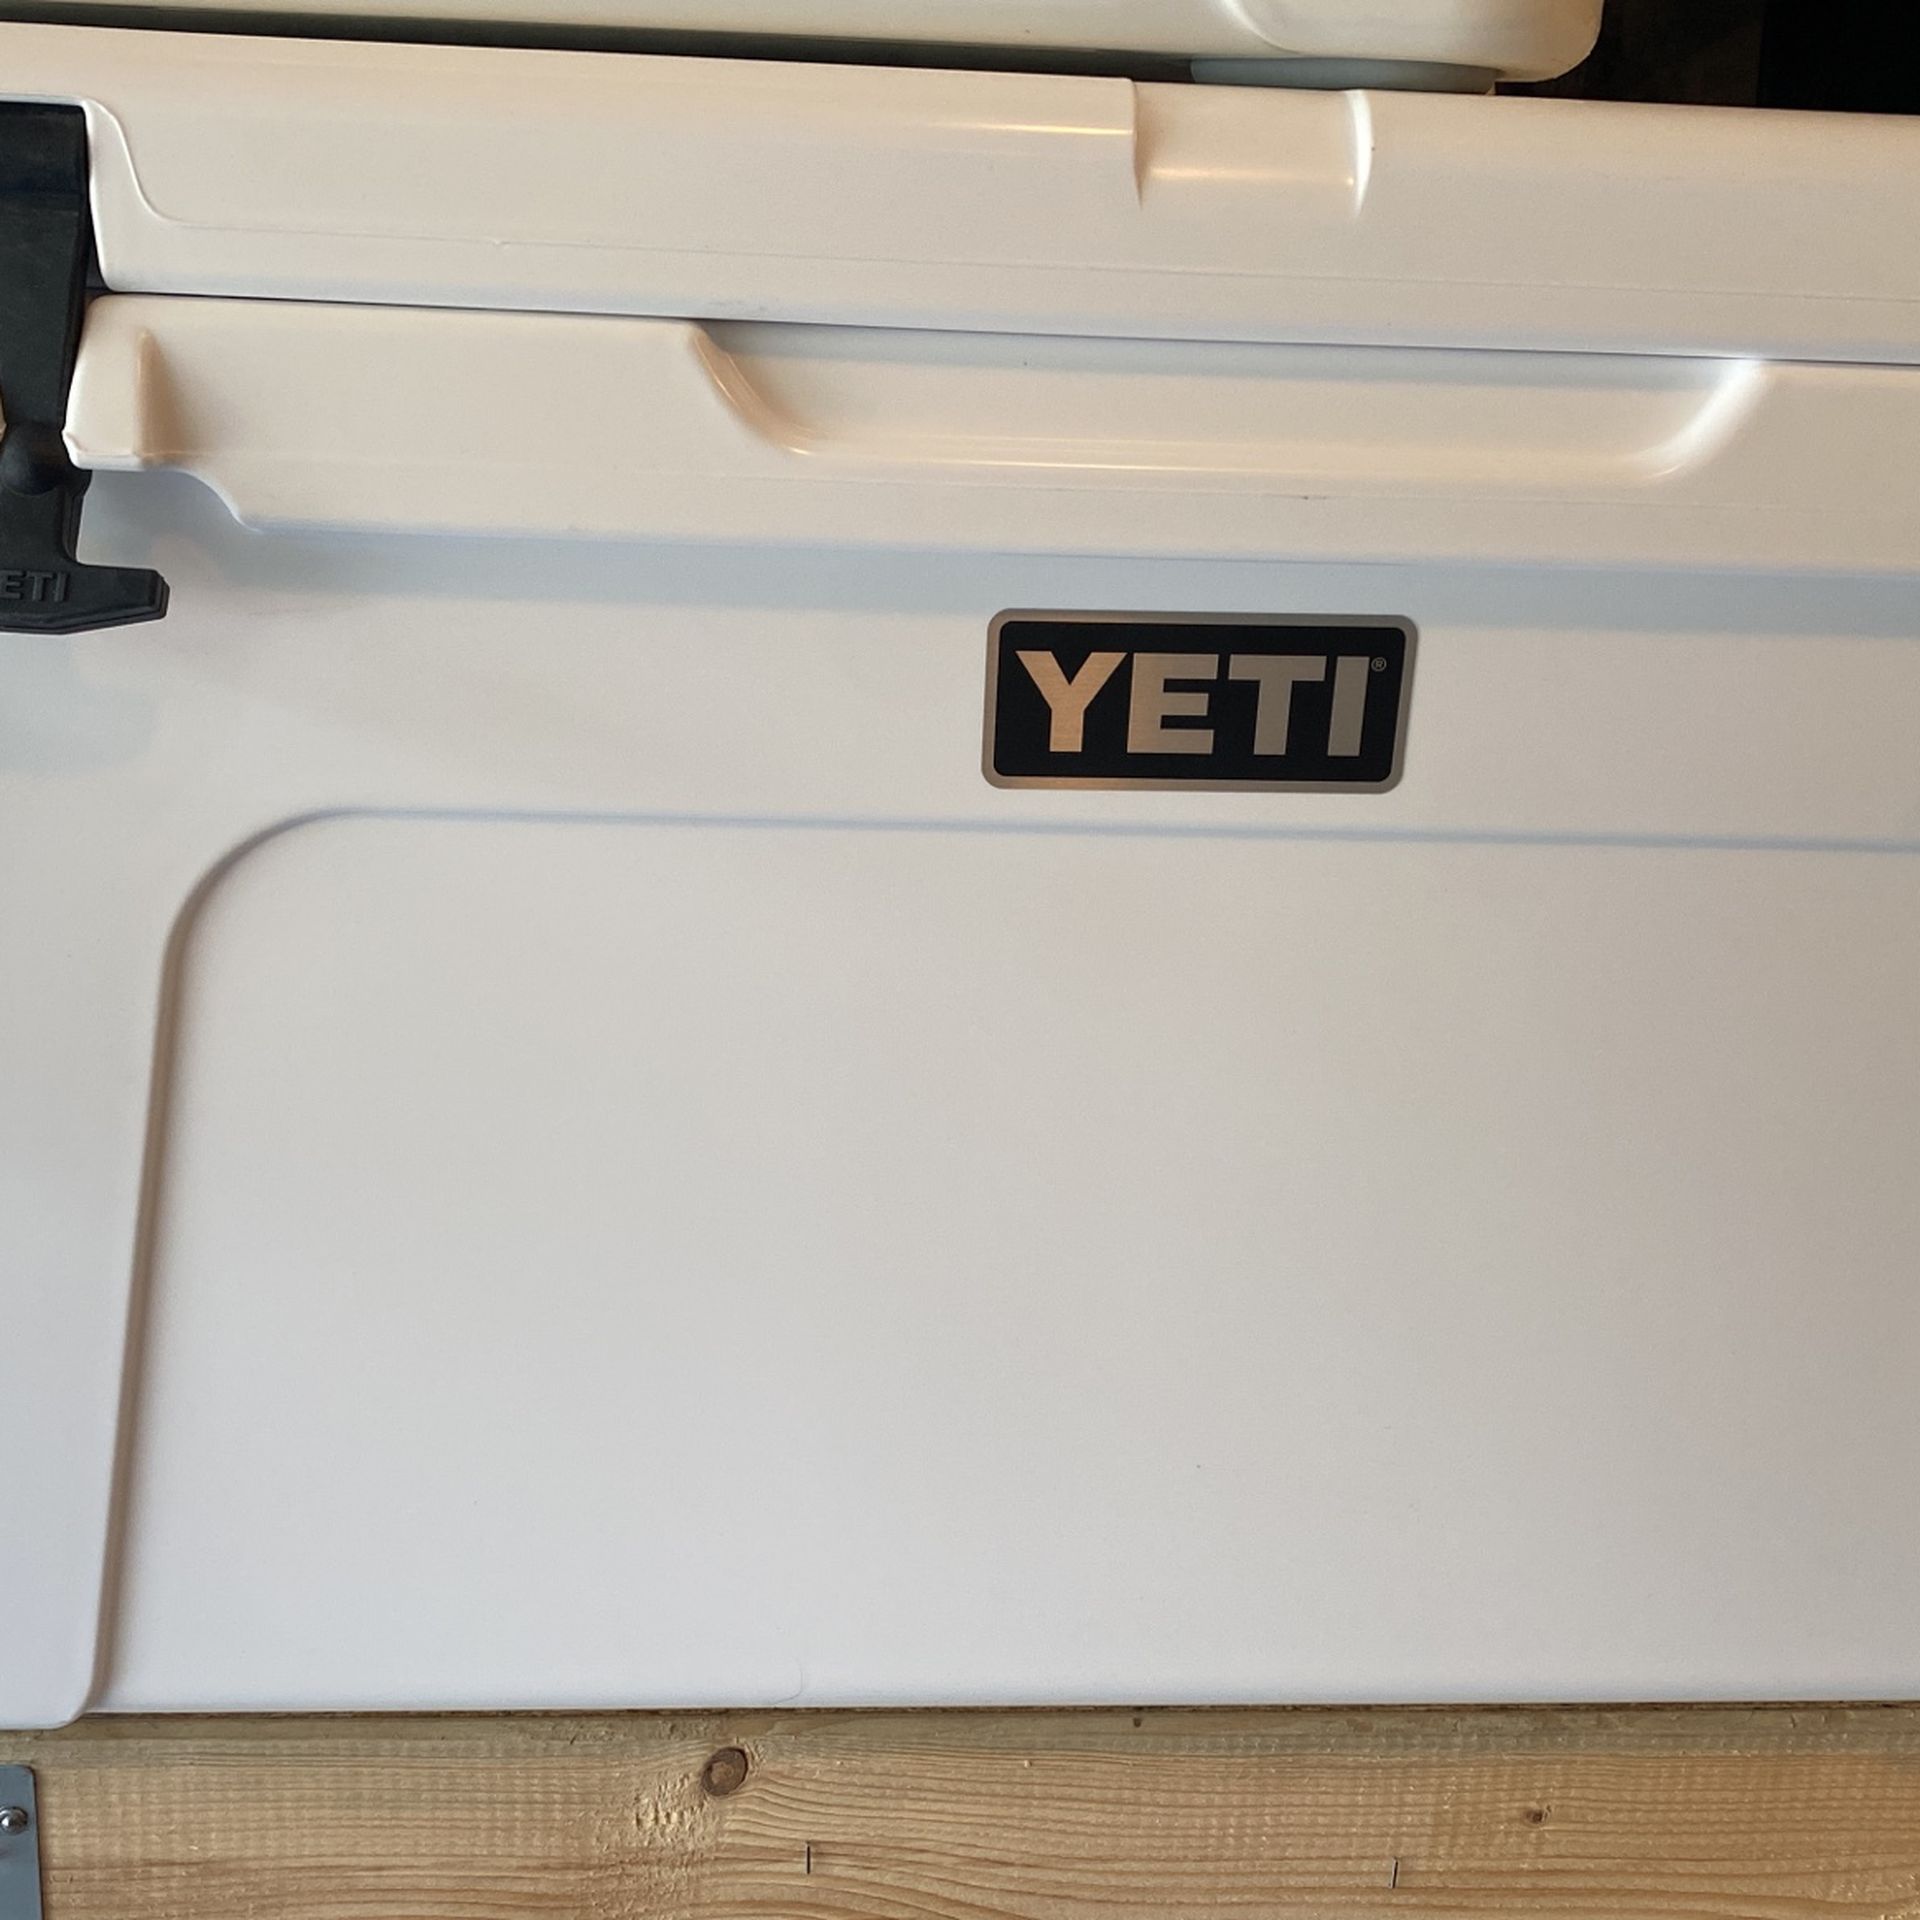 YETI Tundra 75 Cooler White In Color 